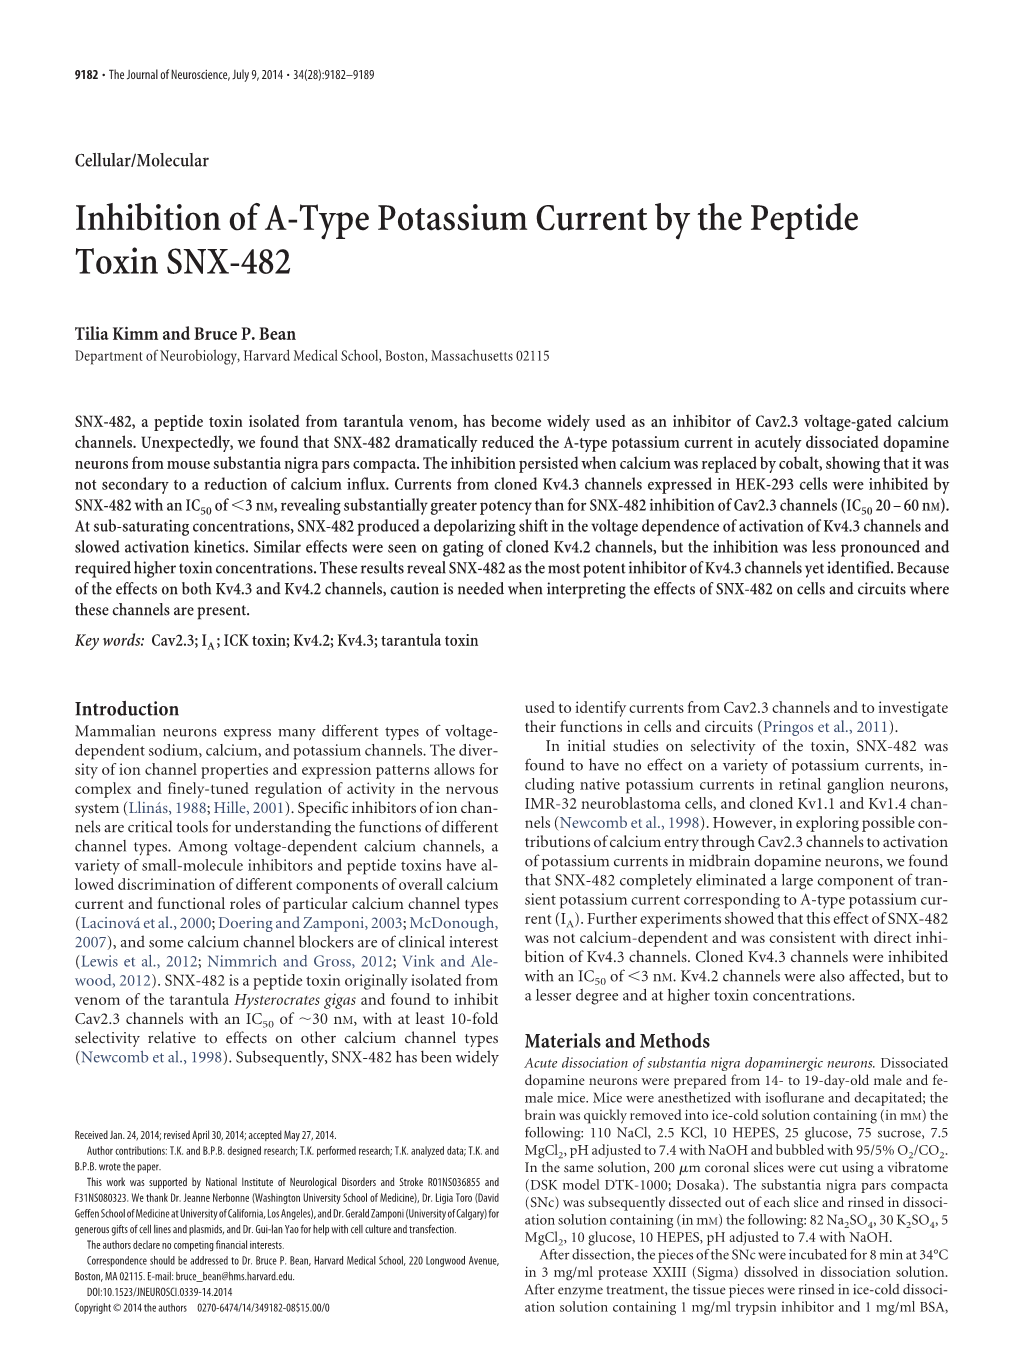 Inhibition of A-Type Potassium Current by the Peptide Toxin SNX-482